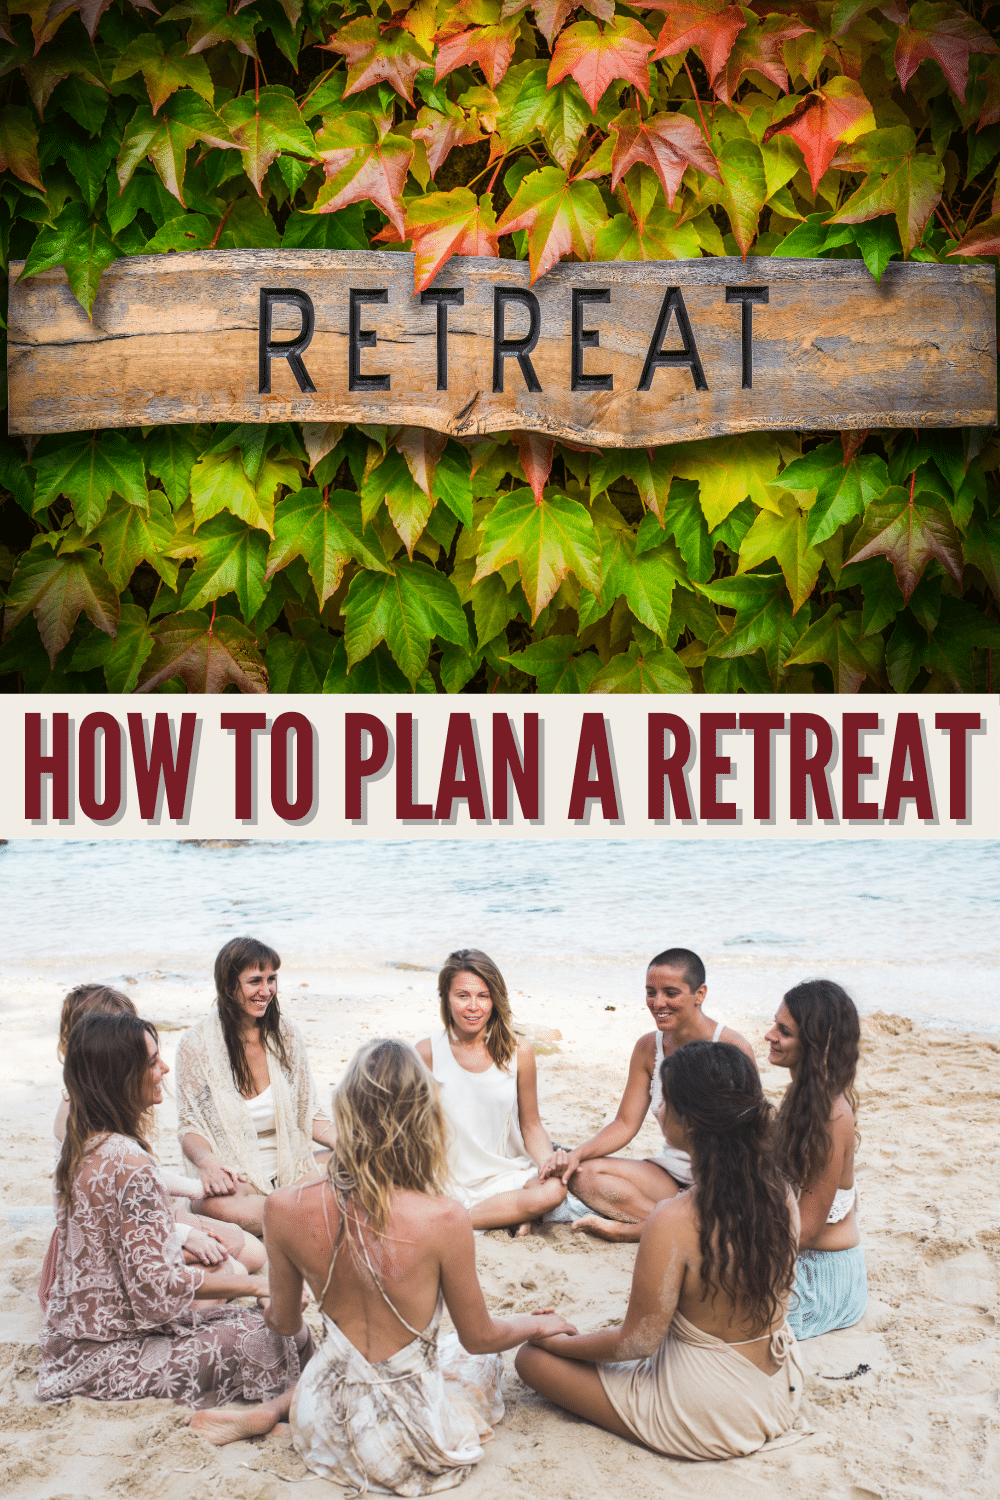 Whether you're planning a multi-day get together with distant friends, a training event for volunteers or staff, or a mastermind retreat, this simple 7-step process will teach you how to plan a retreat that is a complete success! #retreat #eventorganizer #mastermind #gettogethers via @wondermomwannab